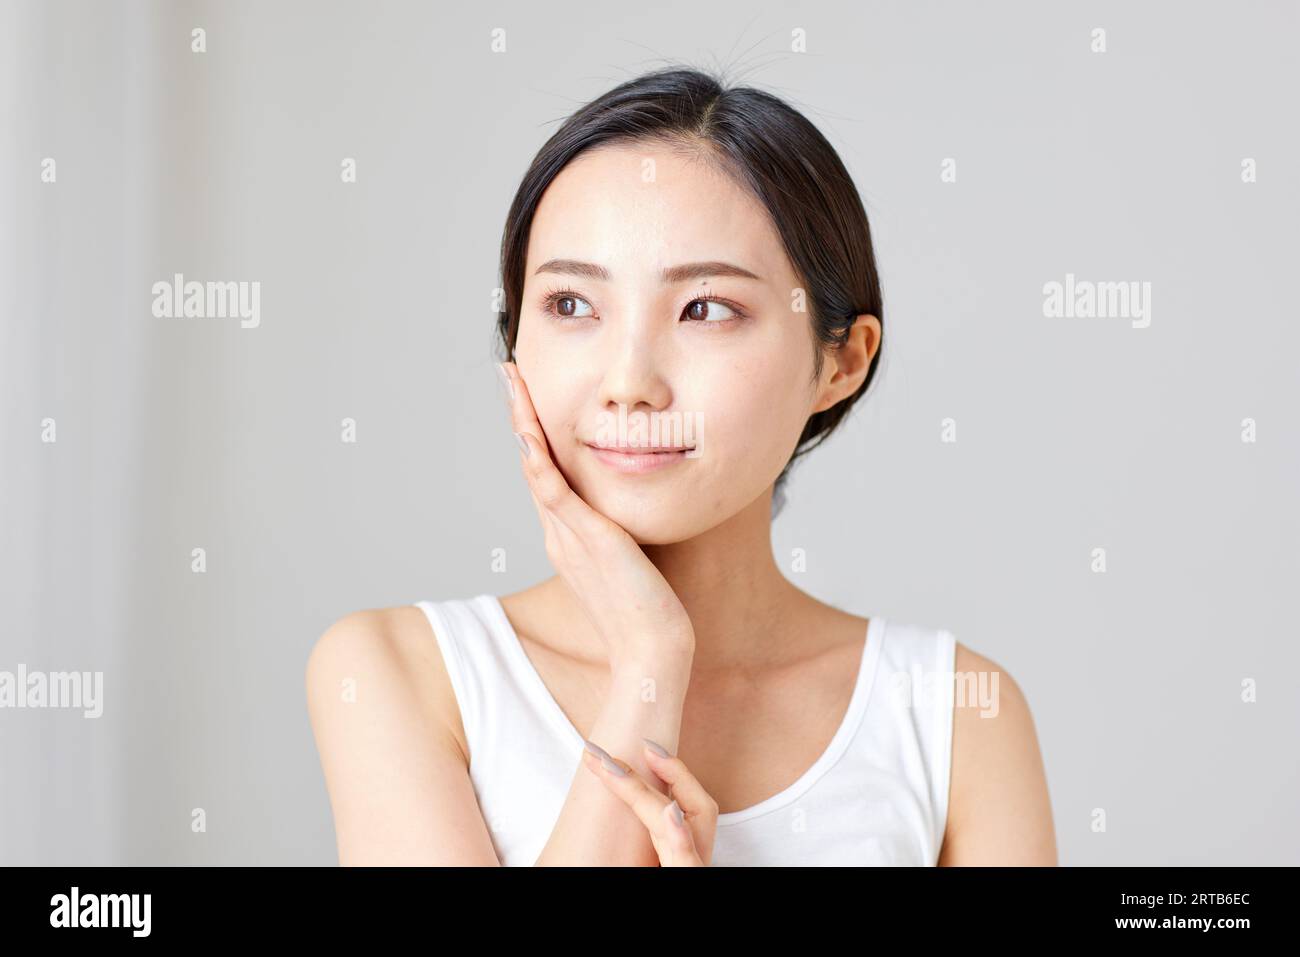 Young Japanese woman beauty portrait Stock Photo